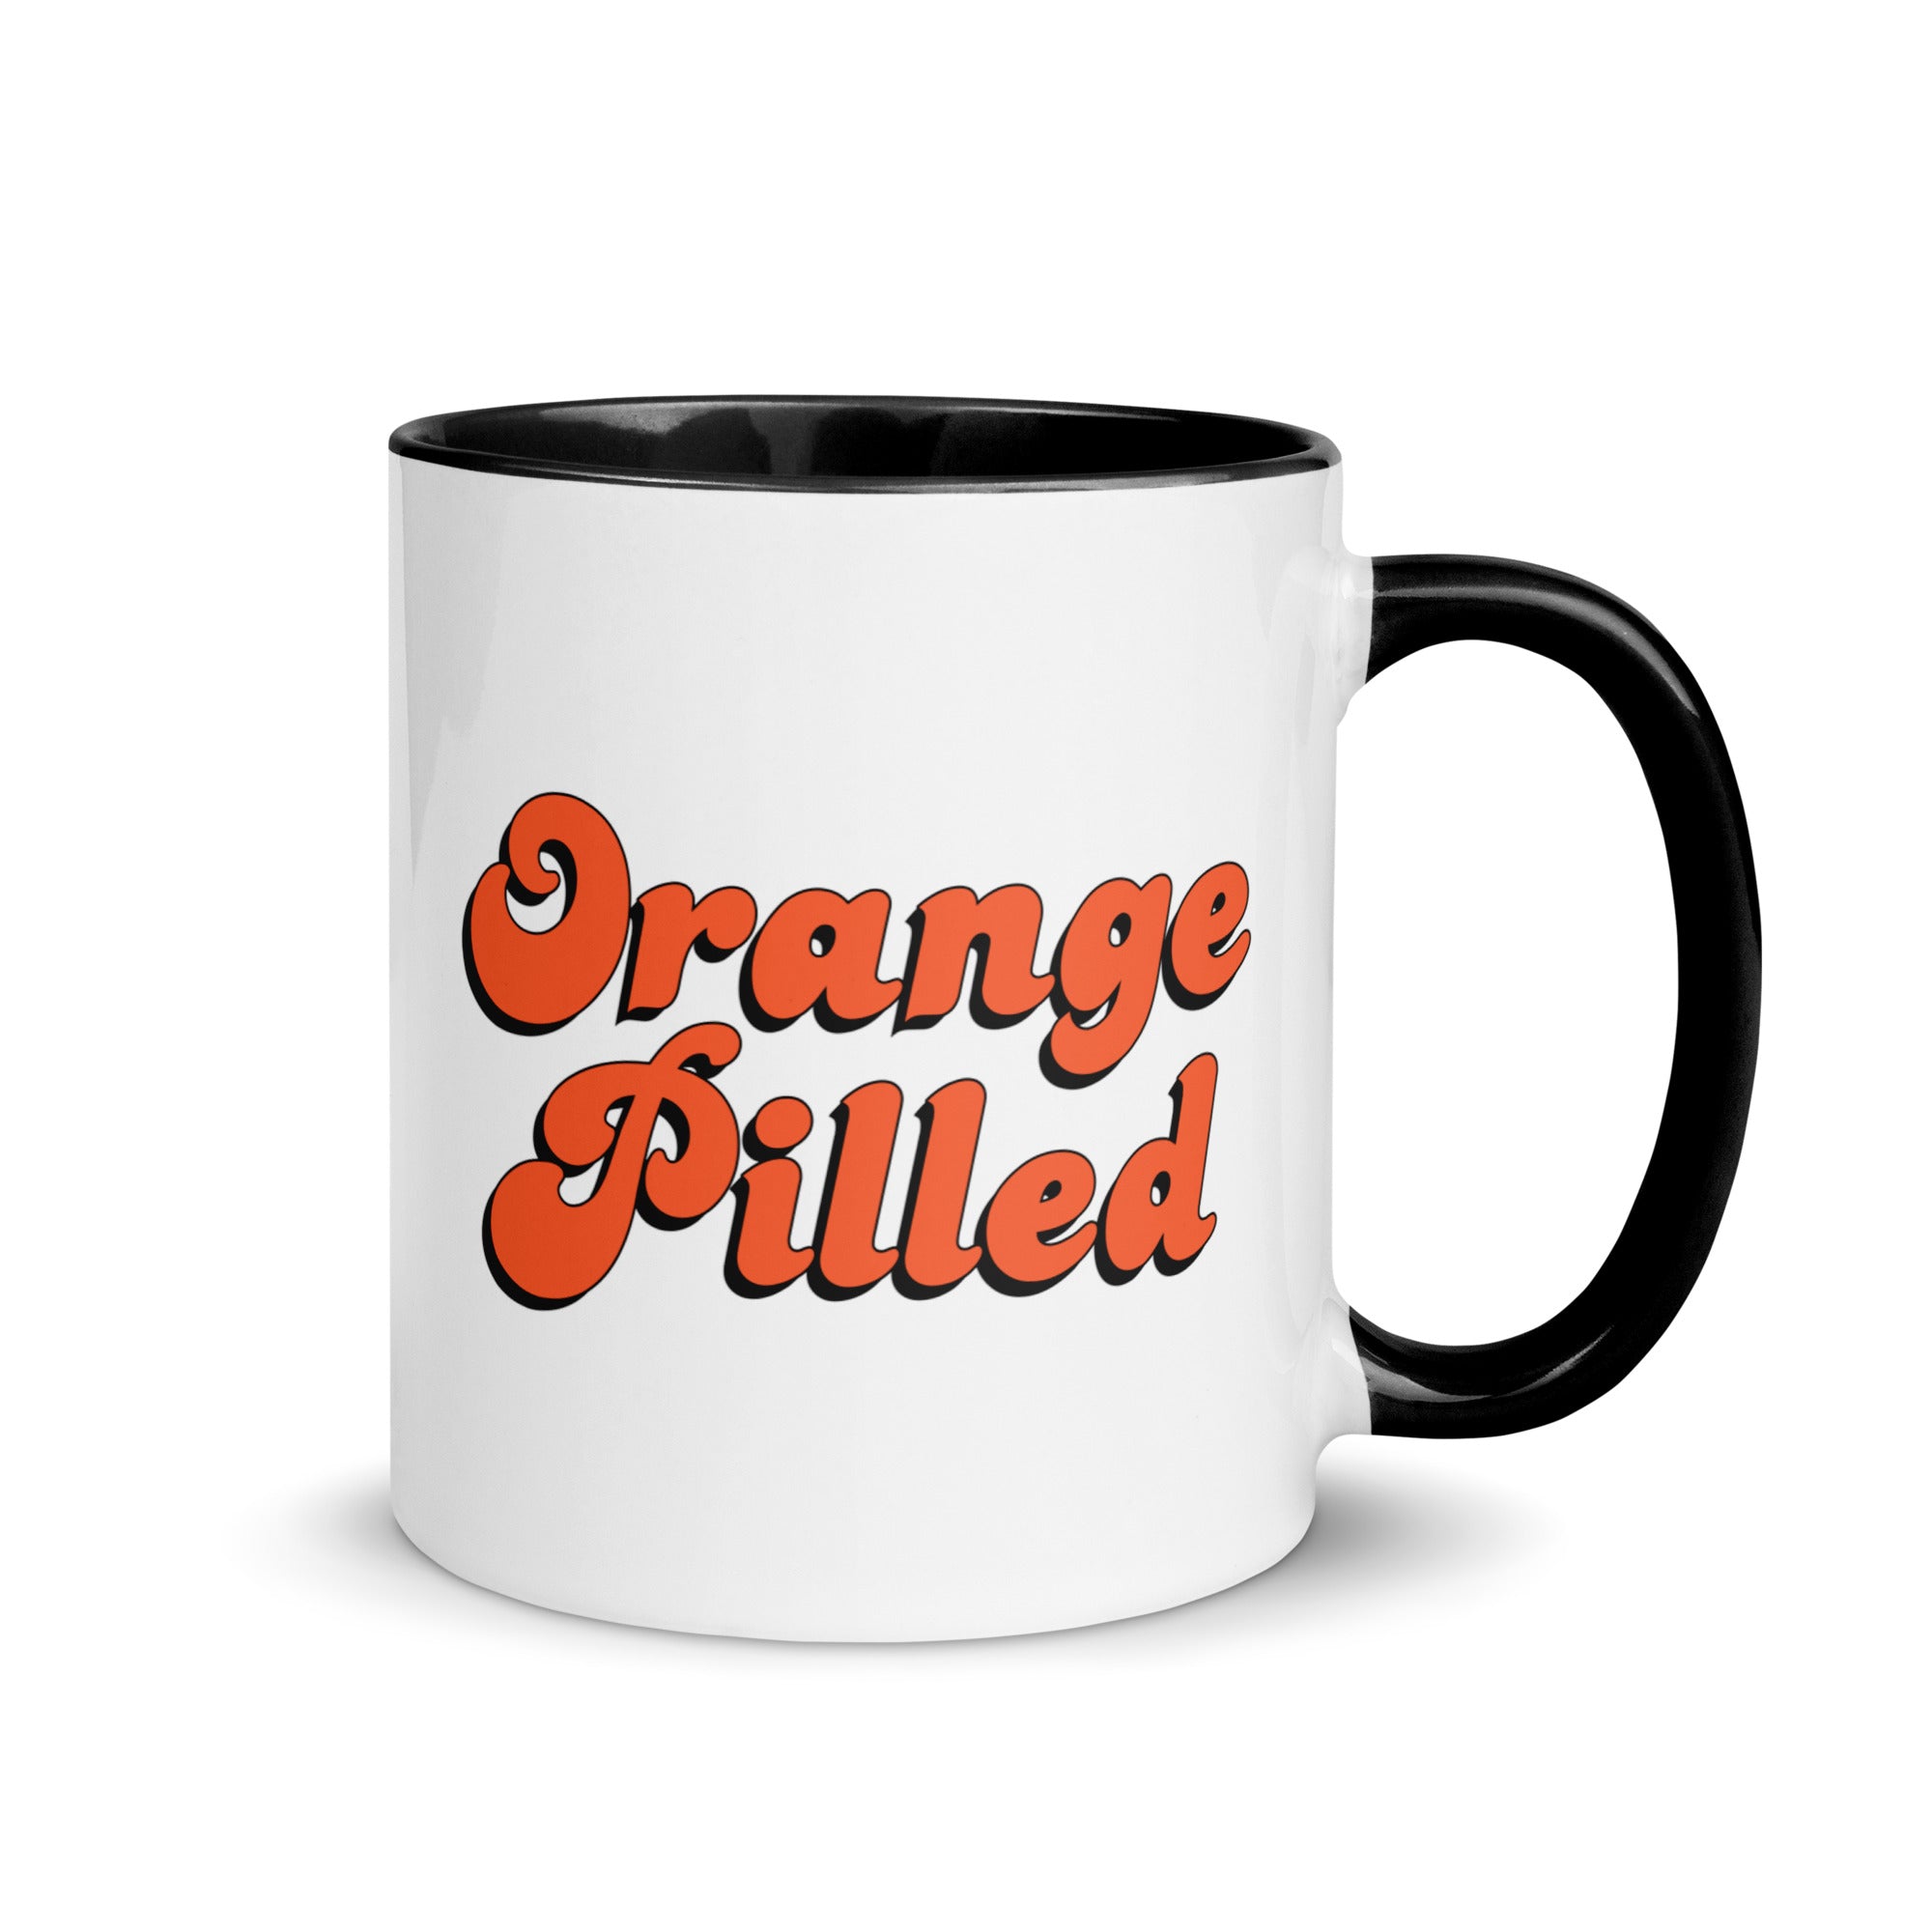 Bitcoin Mug - Our Orange Pilled Mug features an eye-catching retro-style design and makes a cool gift for Bitcoin enthusiasts. Right handle view.